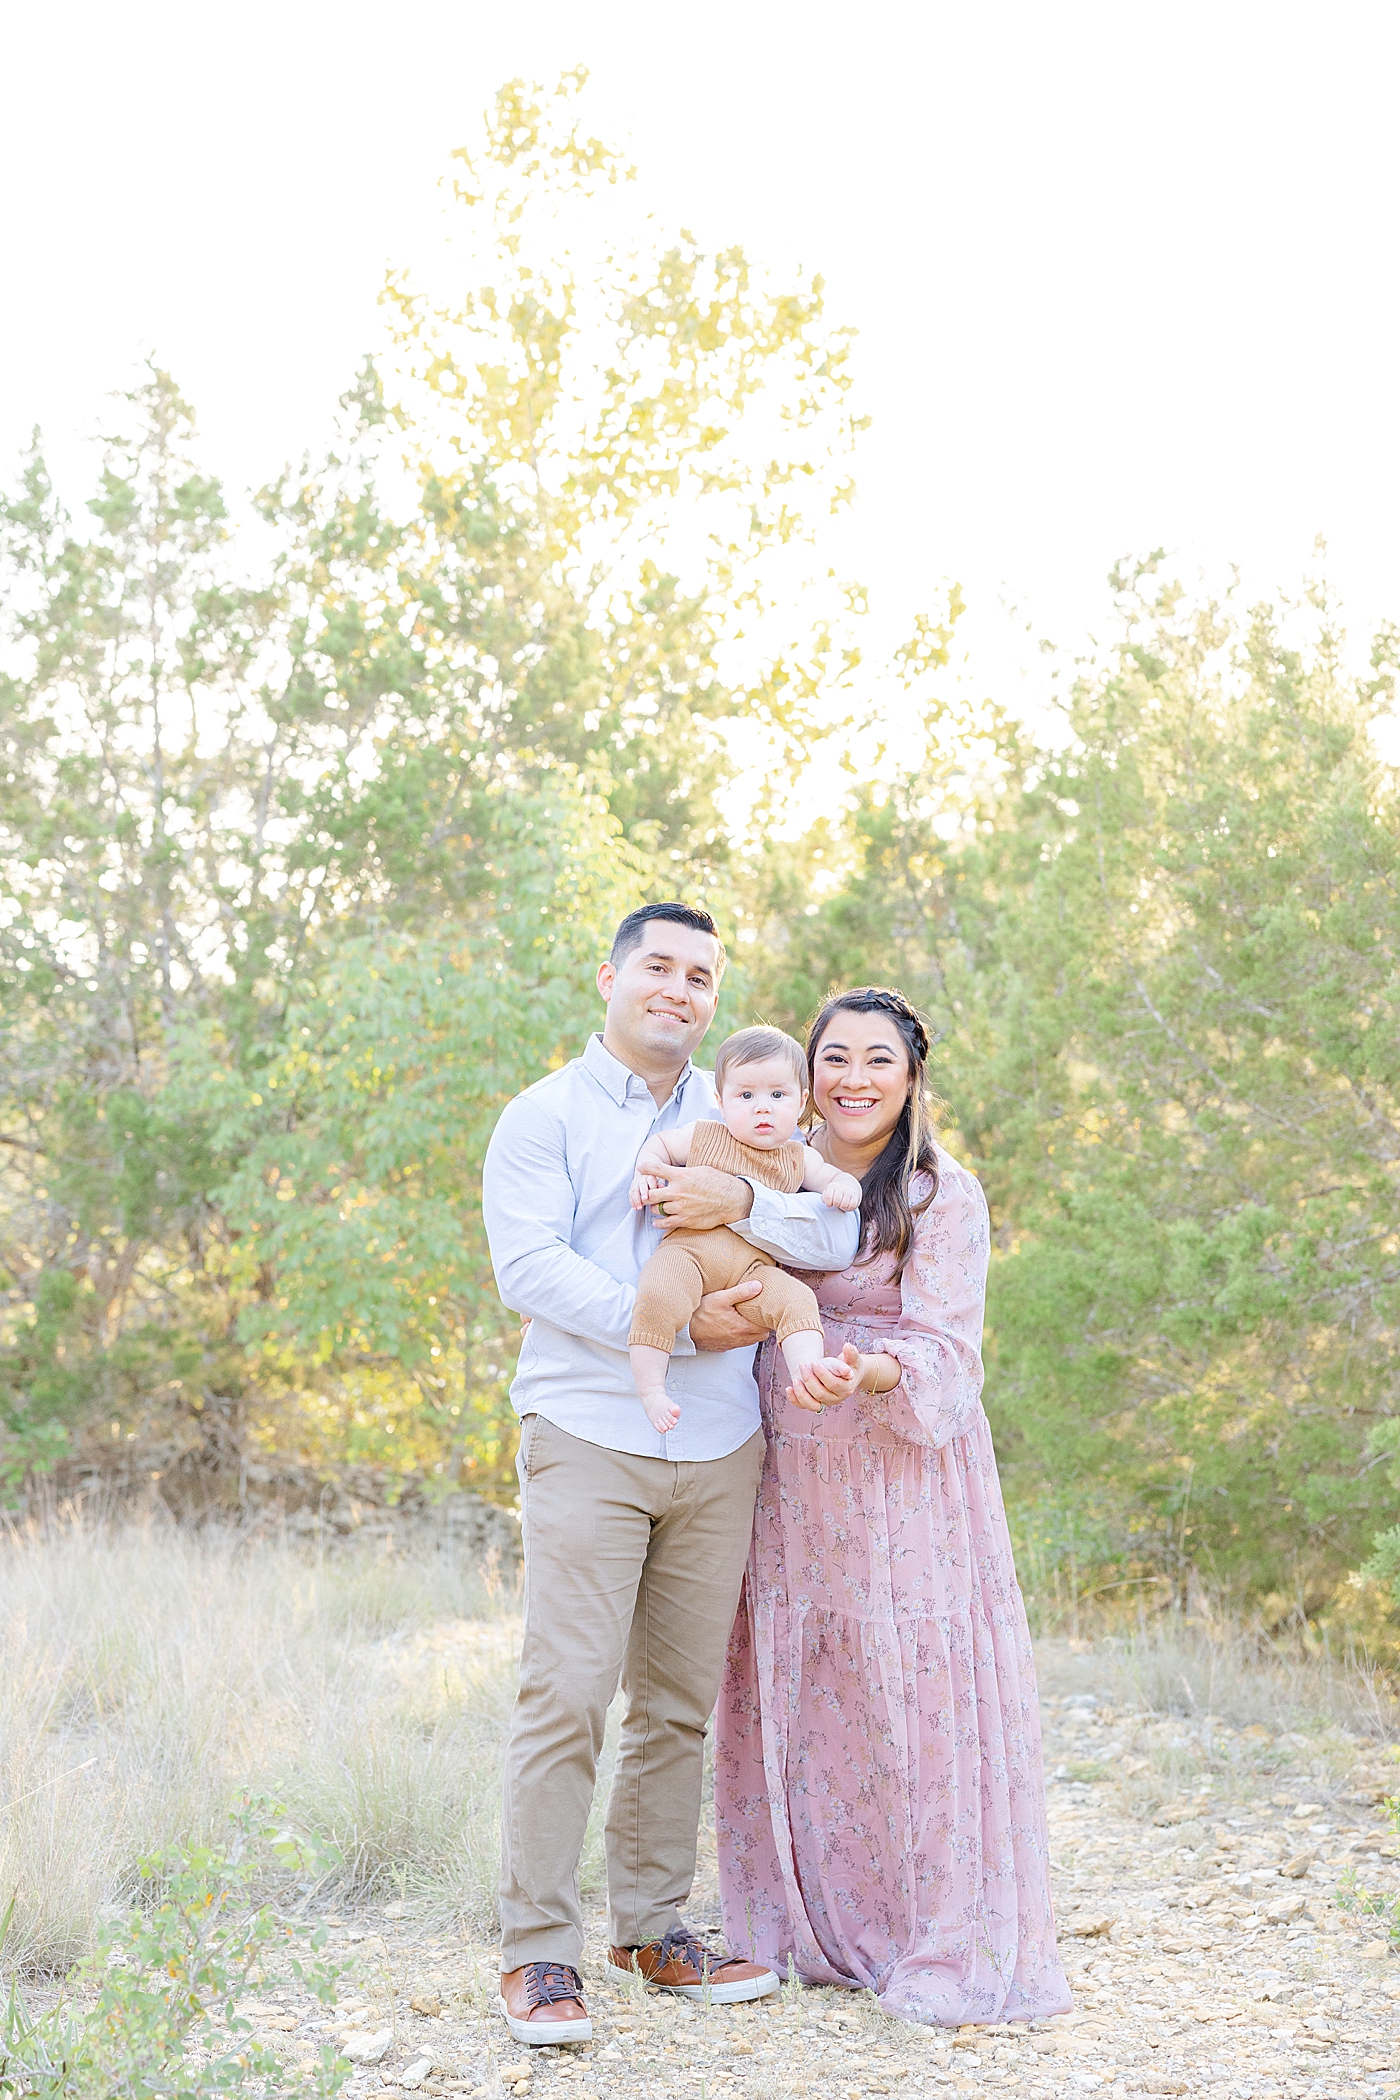 Mom and dad holding their baby boy during Six Month Milestone Session | Image by Sana Ahmed Photography